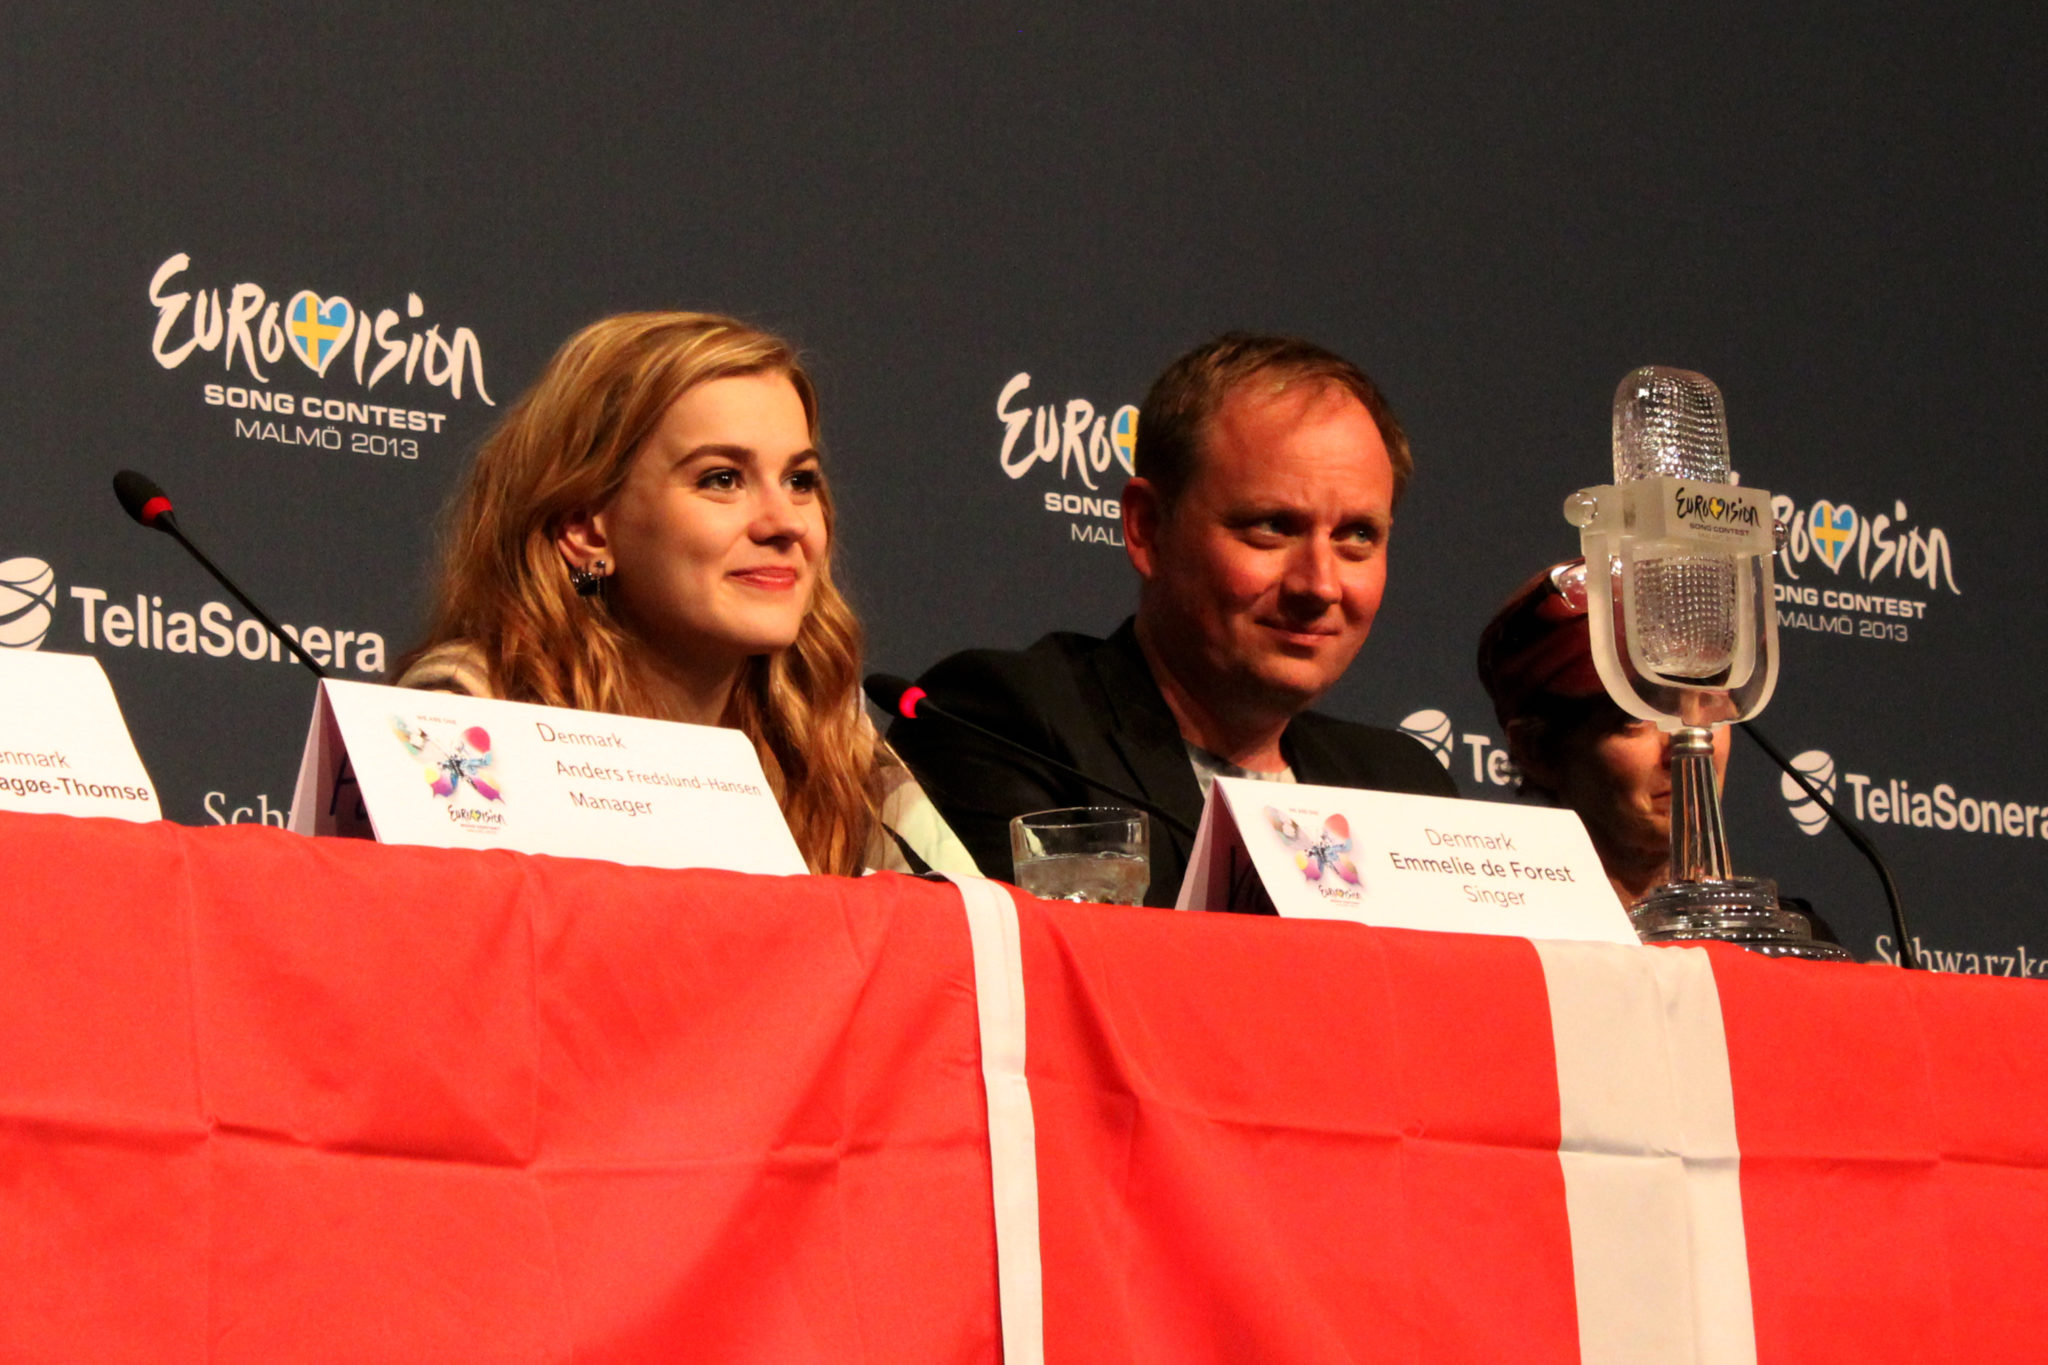 Exclusive audio interview with Jan Lagermand Lundme (Head of Eurovision 2014)